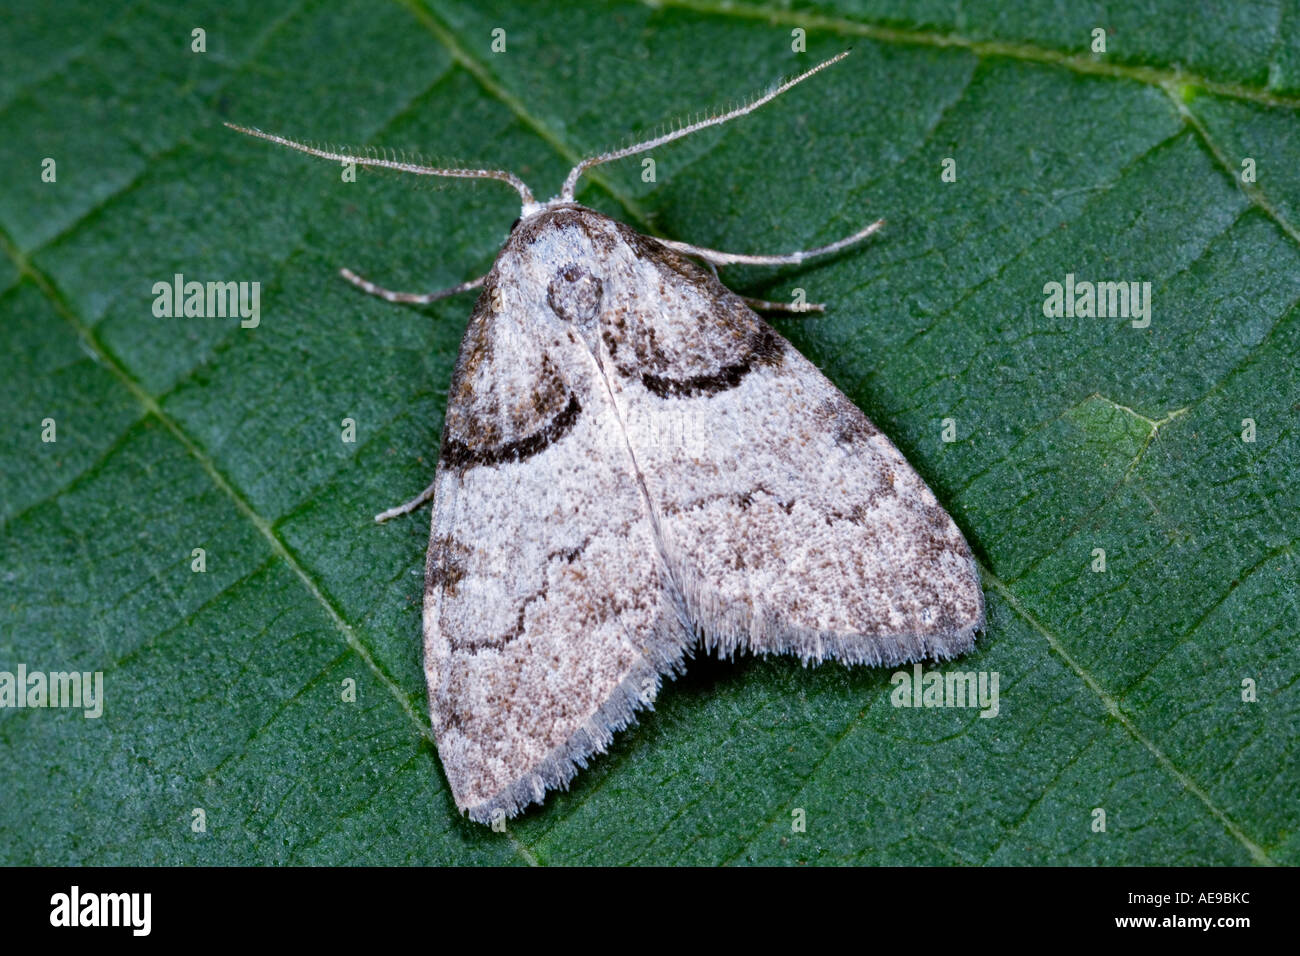 Short cloaked Moth Nola cucullatella at rest on leaf showing markings and detail Potton Bedfordshire Stock Photo